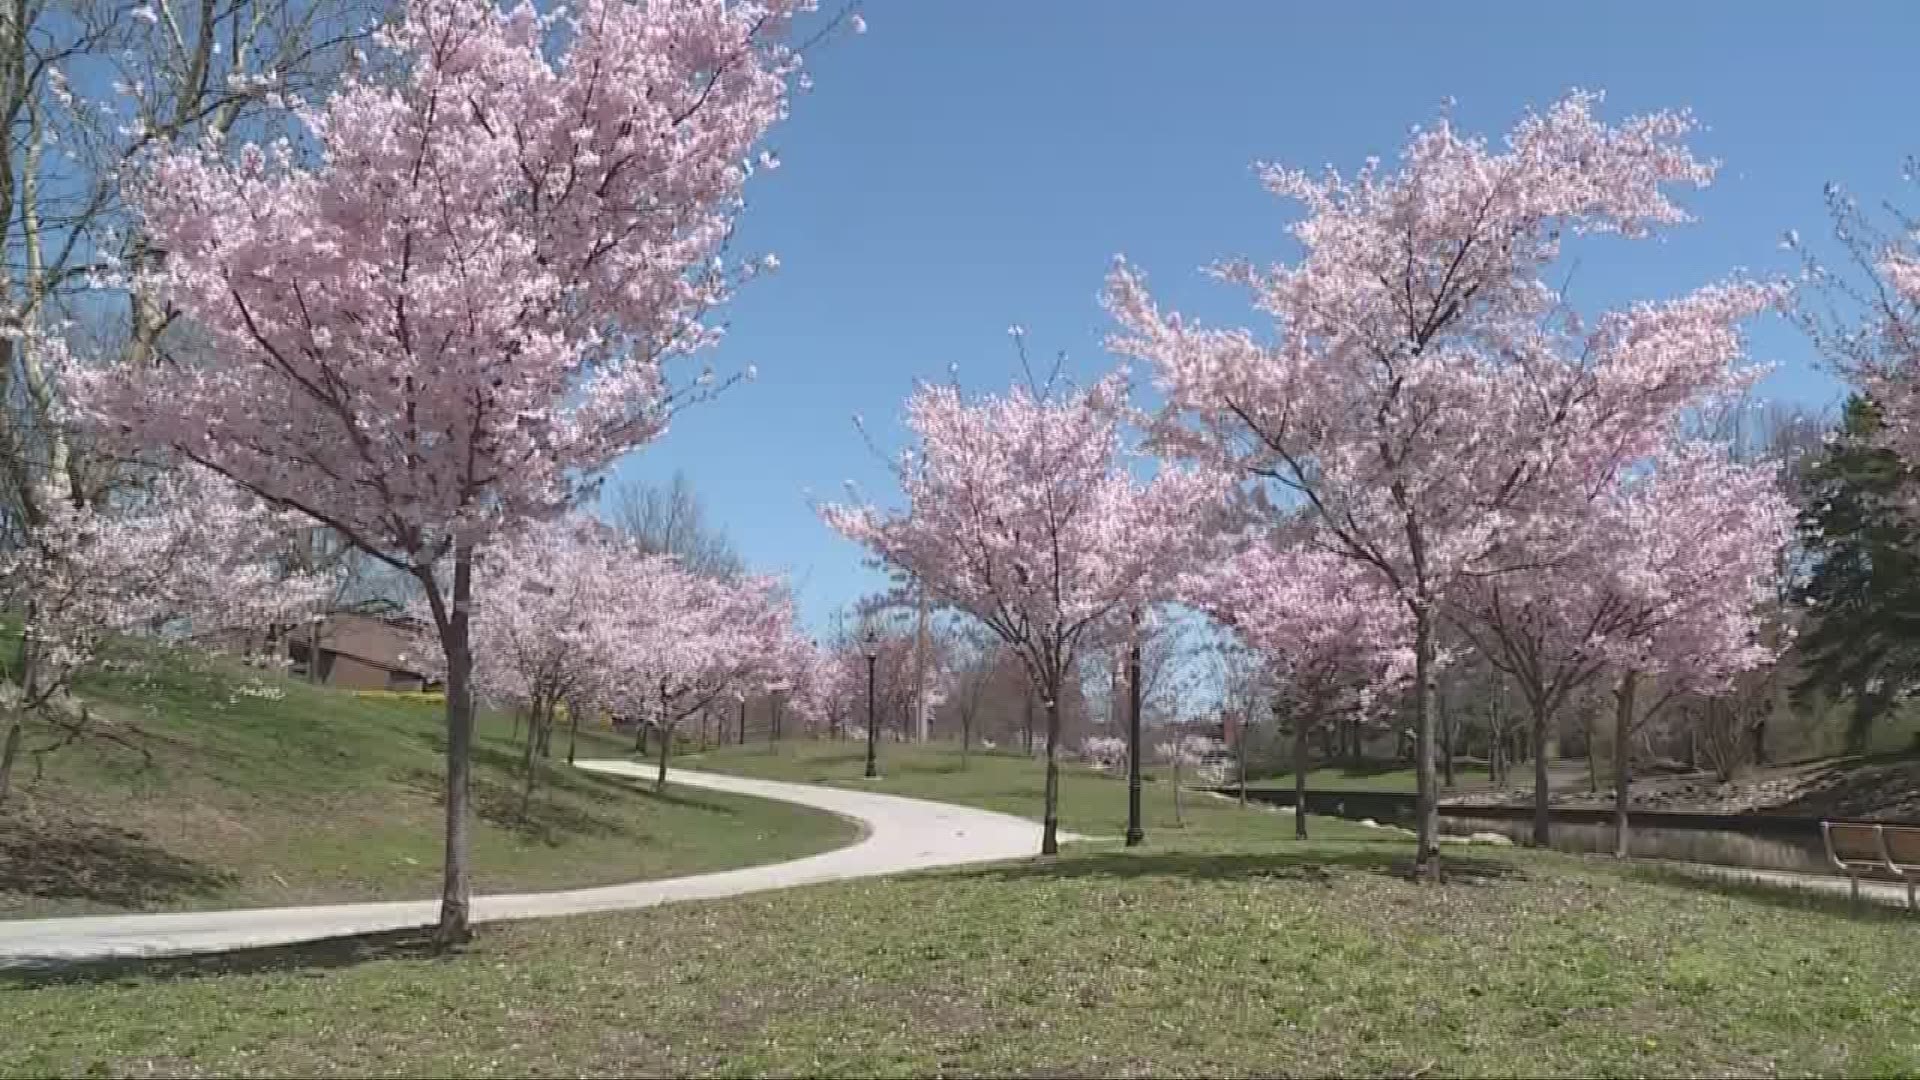 Find out where Northeast Ohio has Cherry Blossoms in full bloom